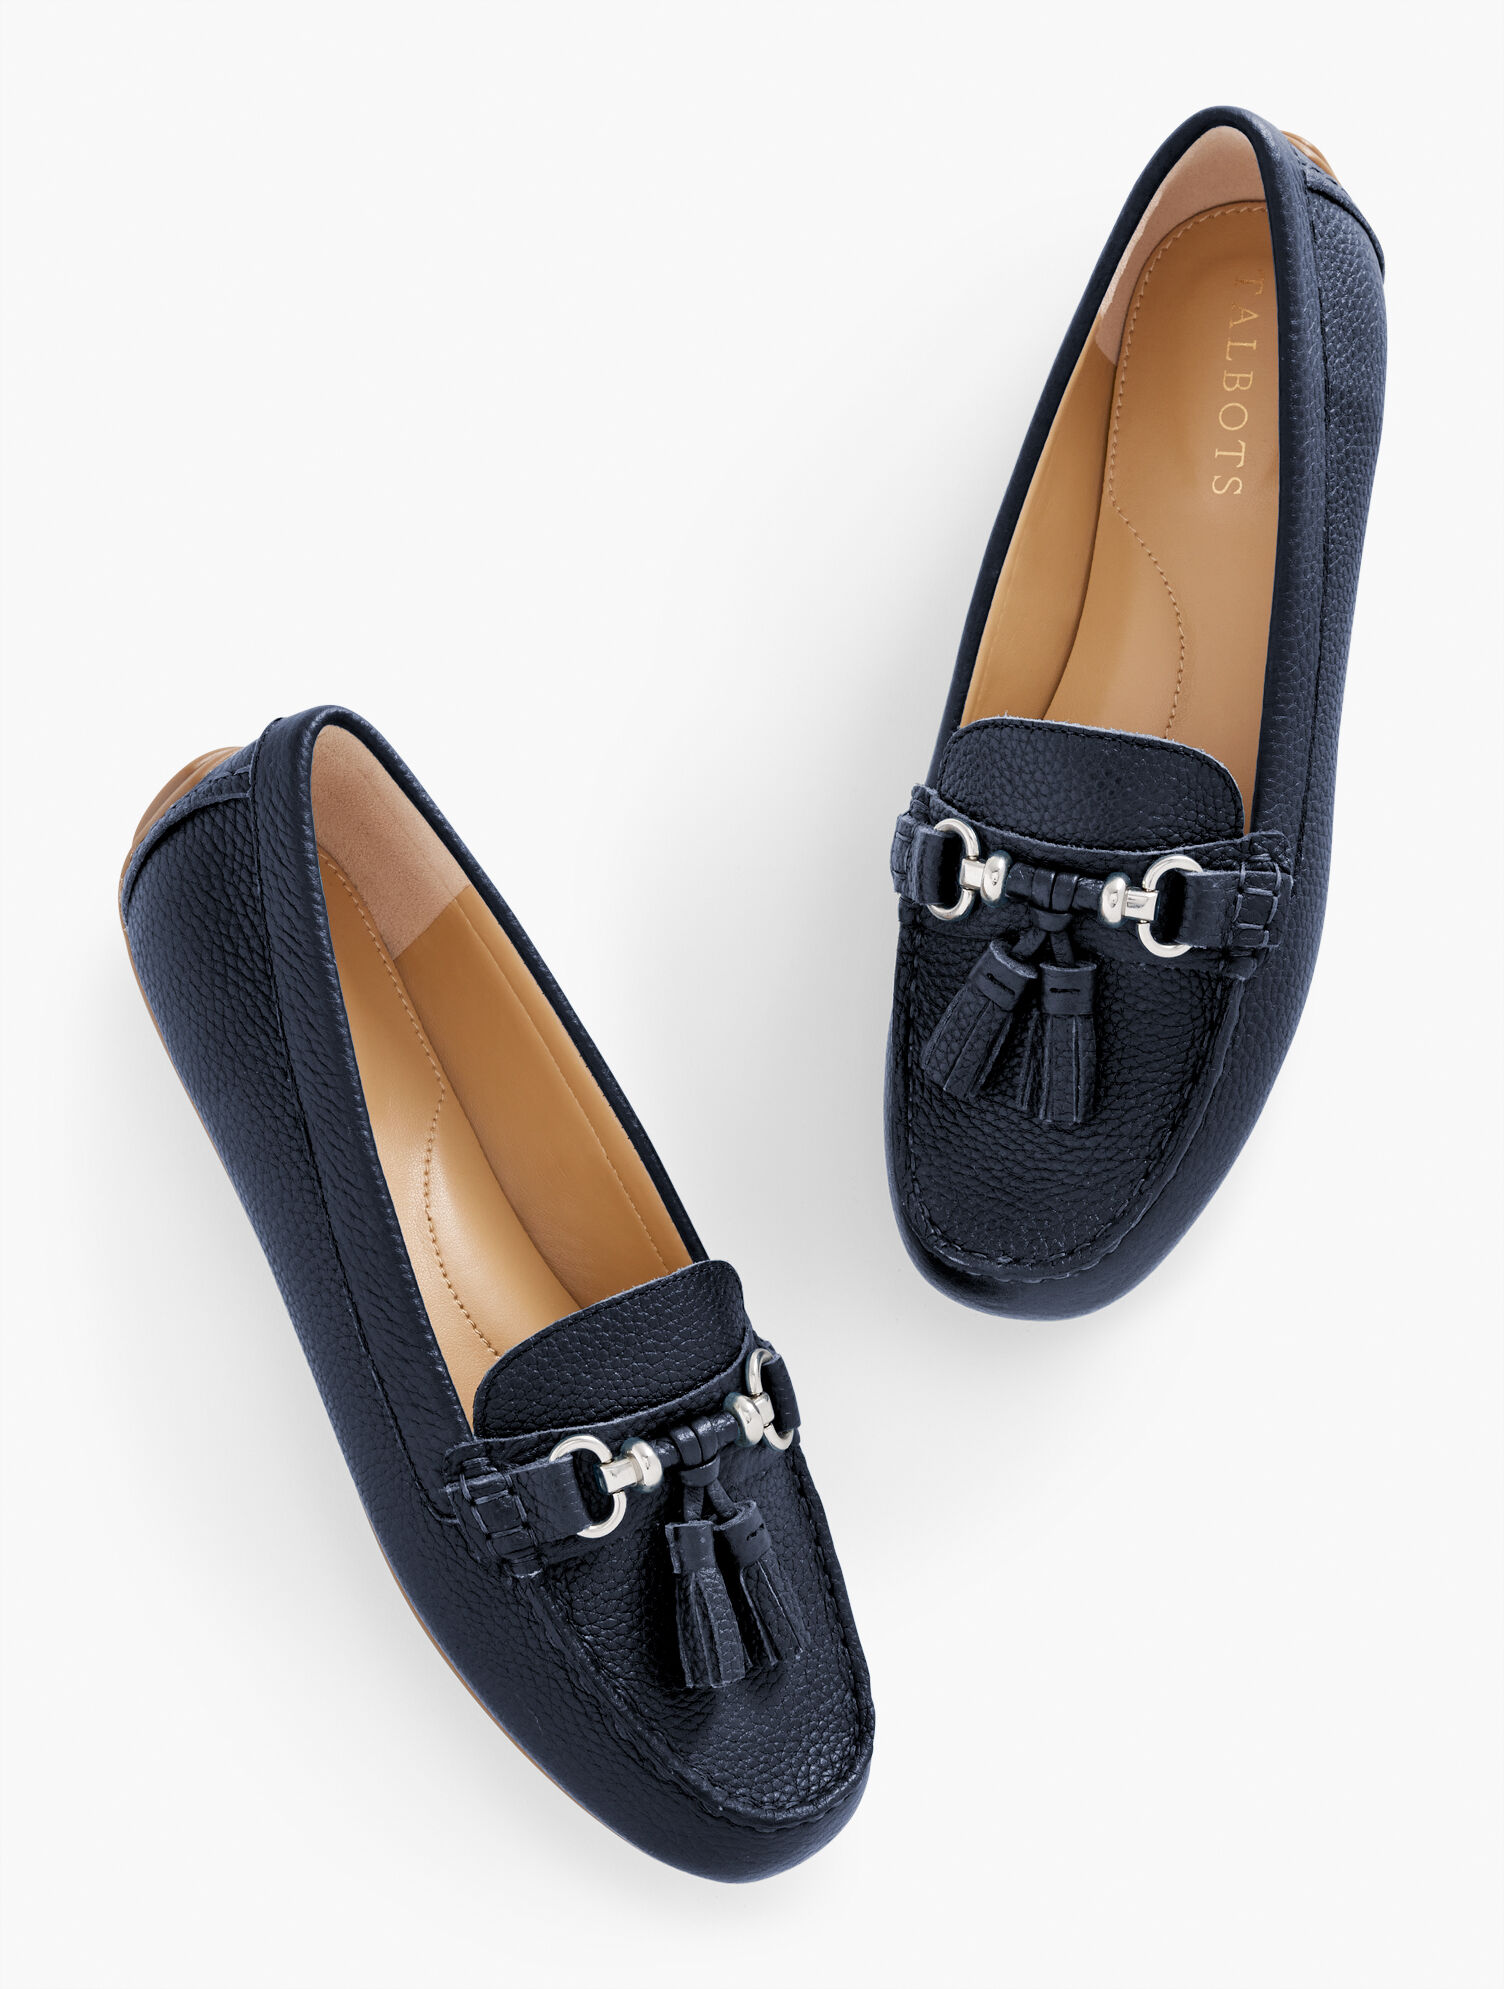 Everson Tassel Driving Moccasins - Leather | Talbots